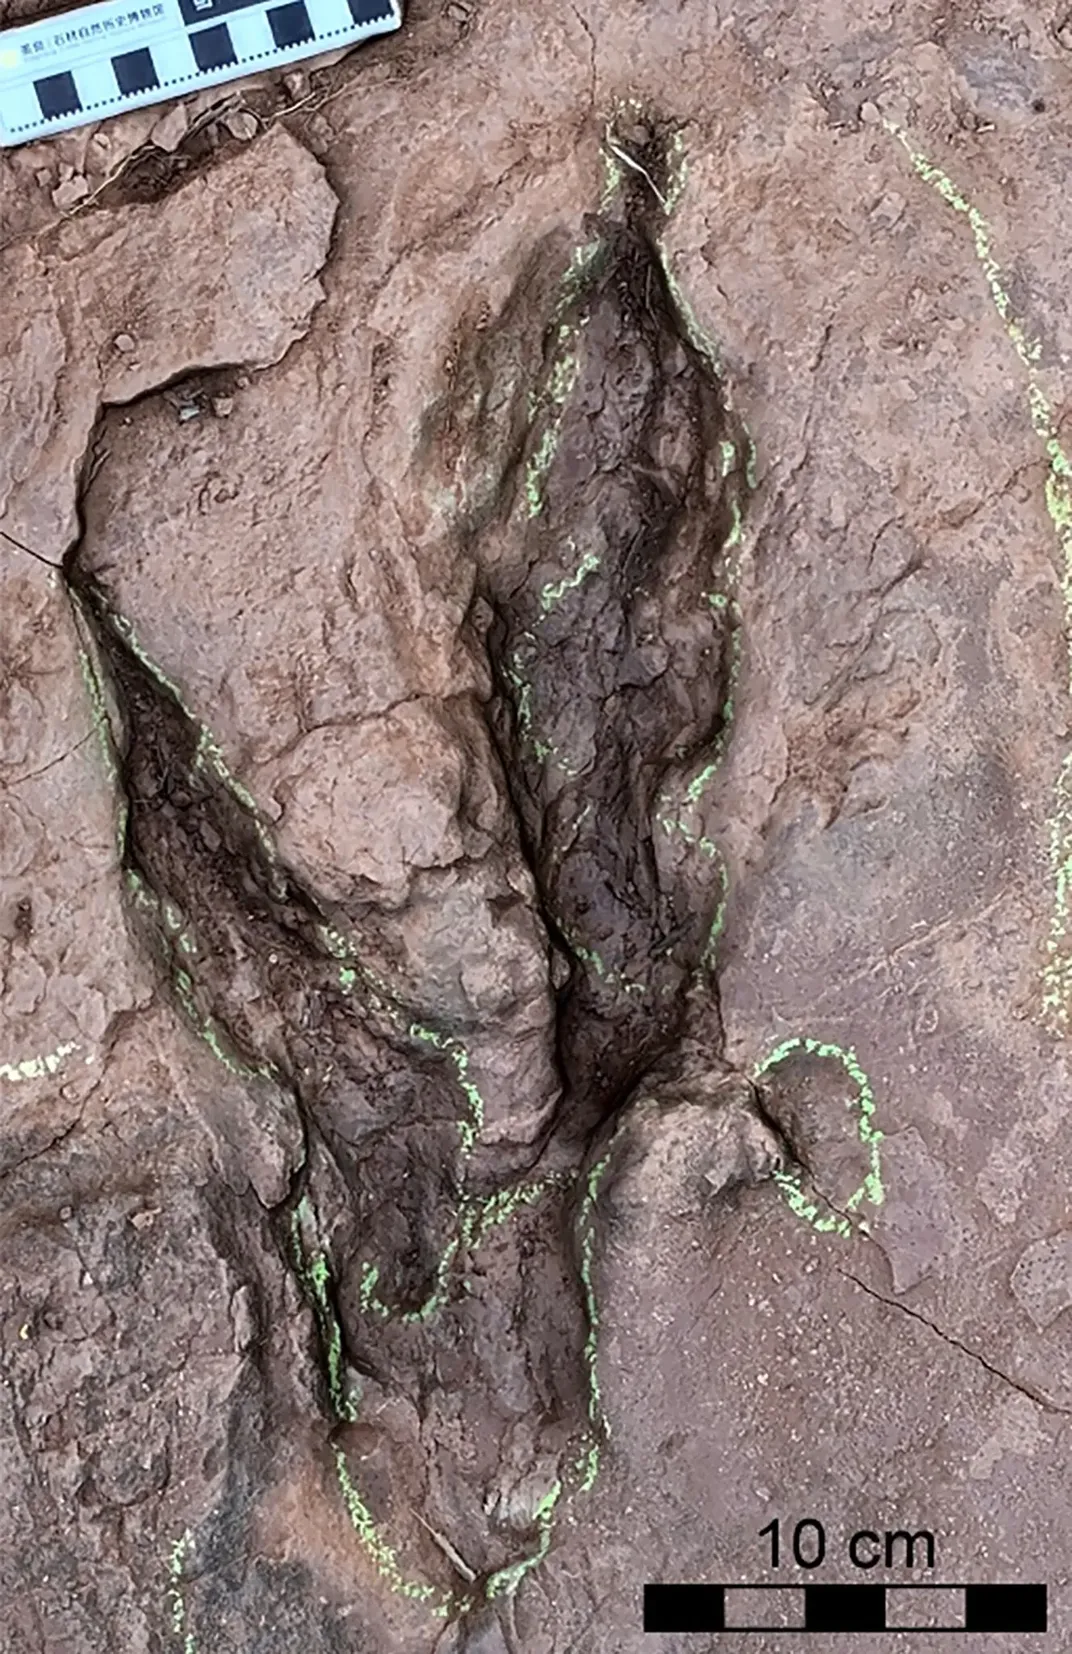 a raptor footprint, featuring two toes